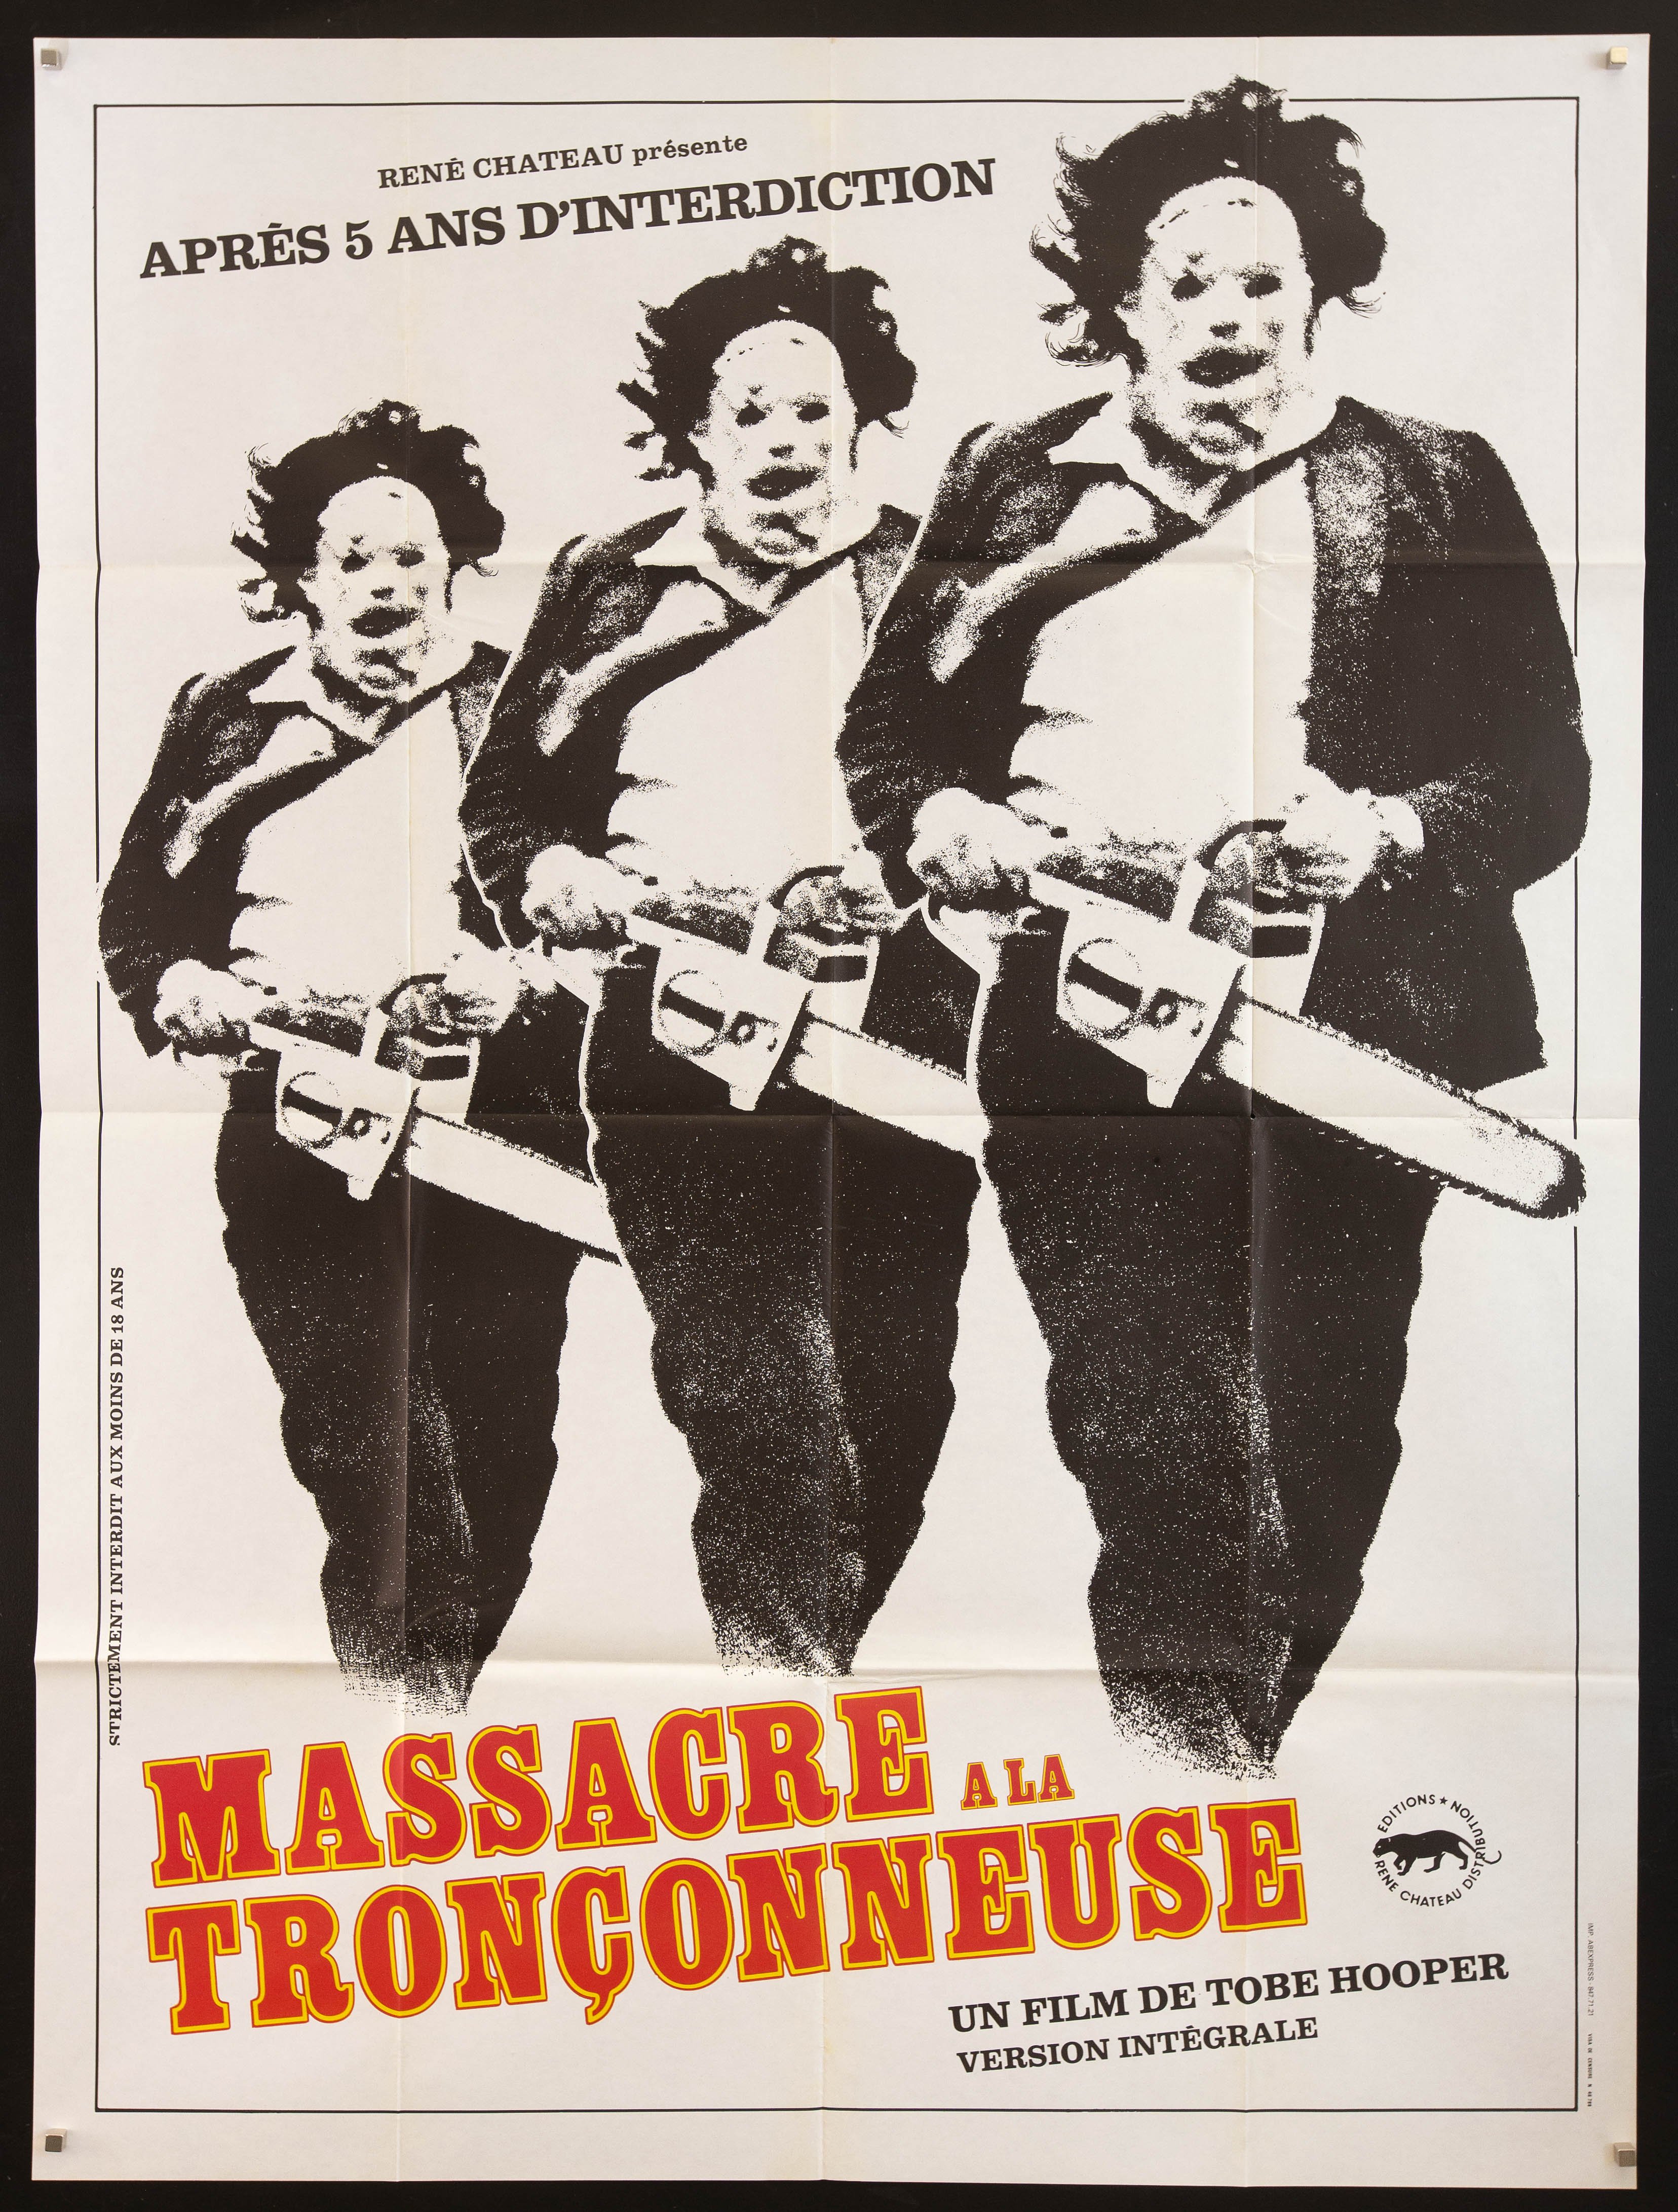 The Texas Chainsaw Massacre Movie Poster 1974 1 Sheet (27x41)